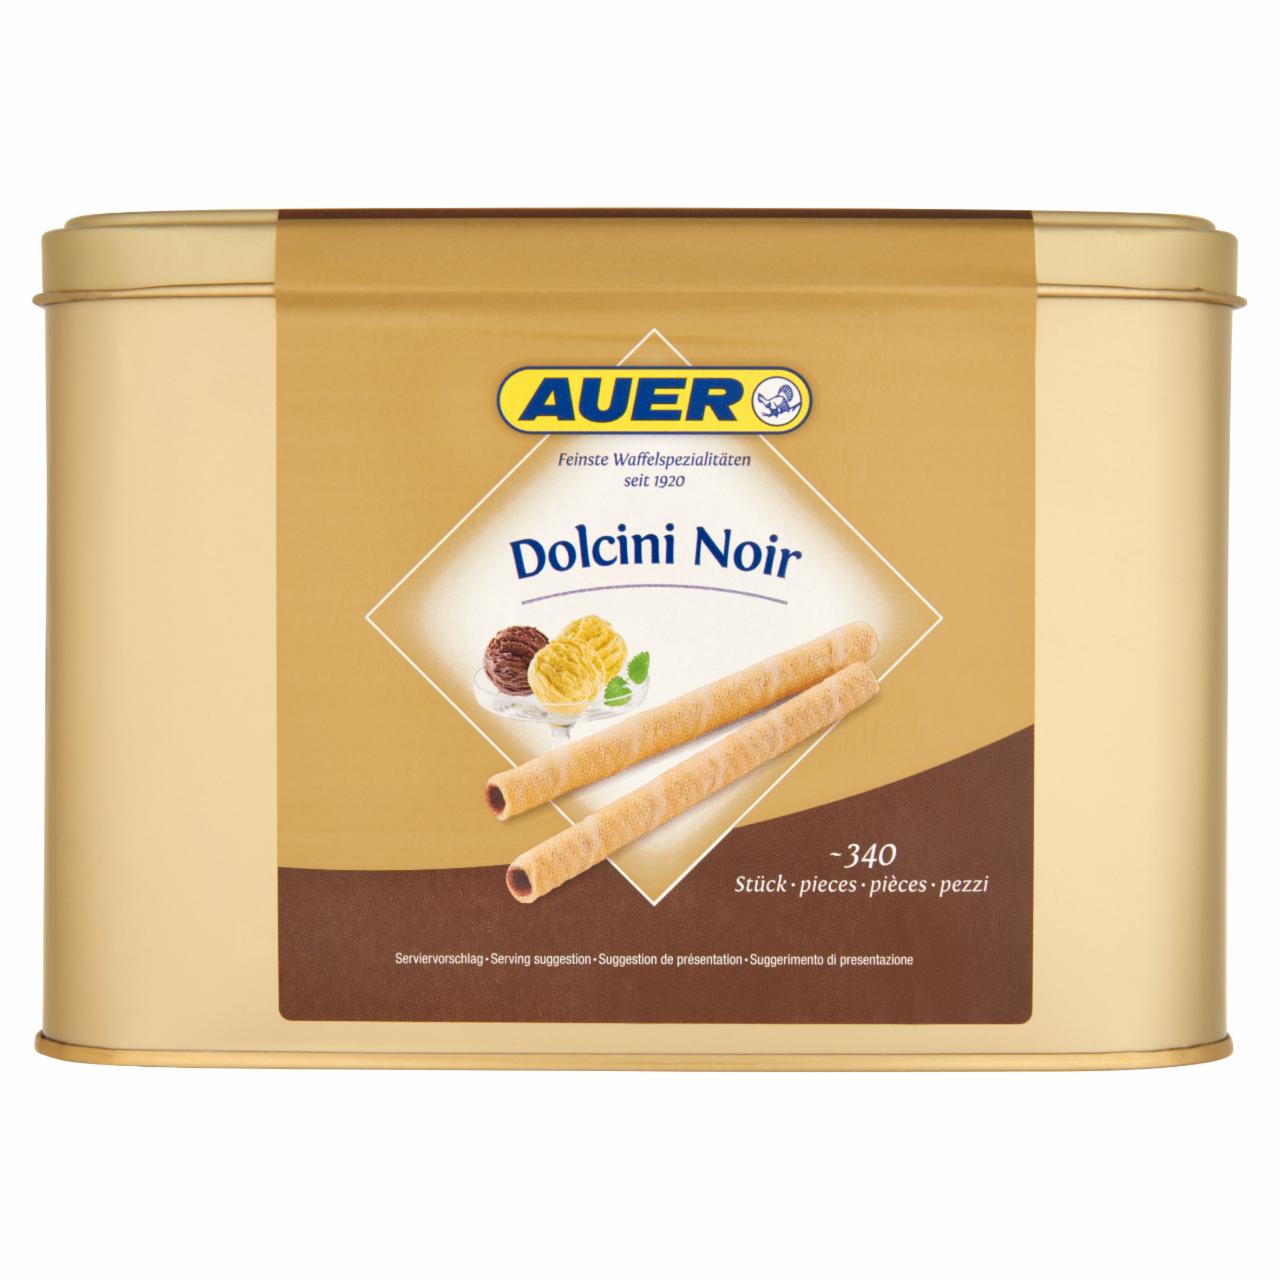 Photo - Auer Dolcini Noir Cocoa Coated from Within Hollow Wafer Rolls 340 pcs 1050 g